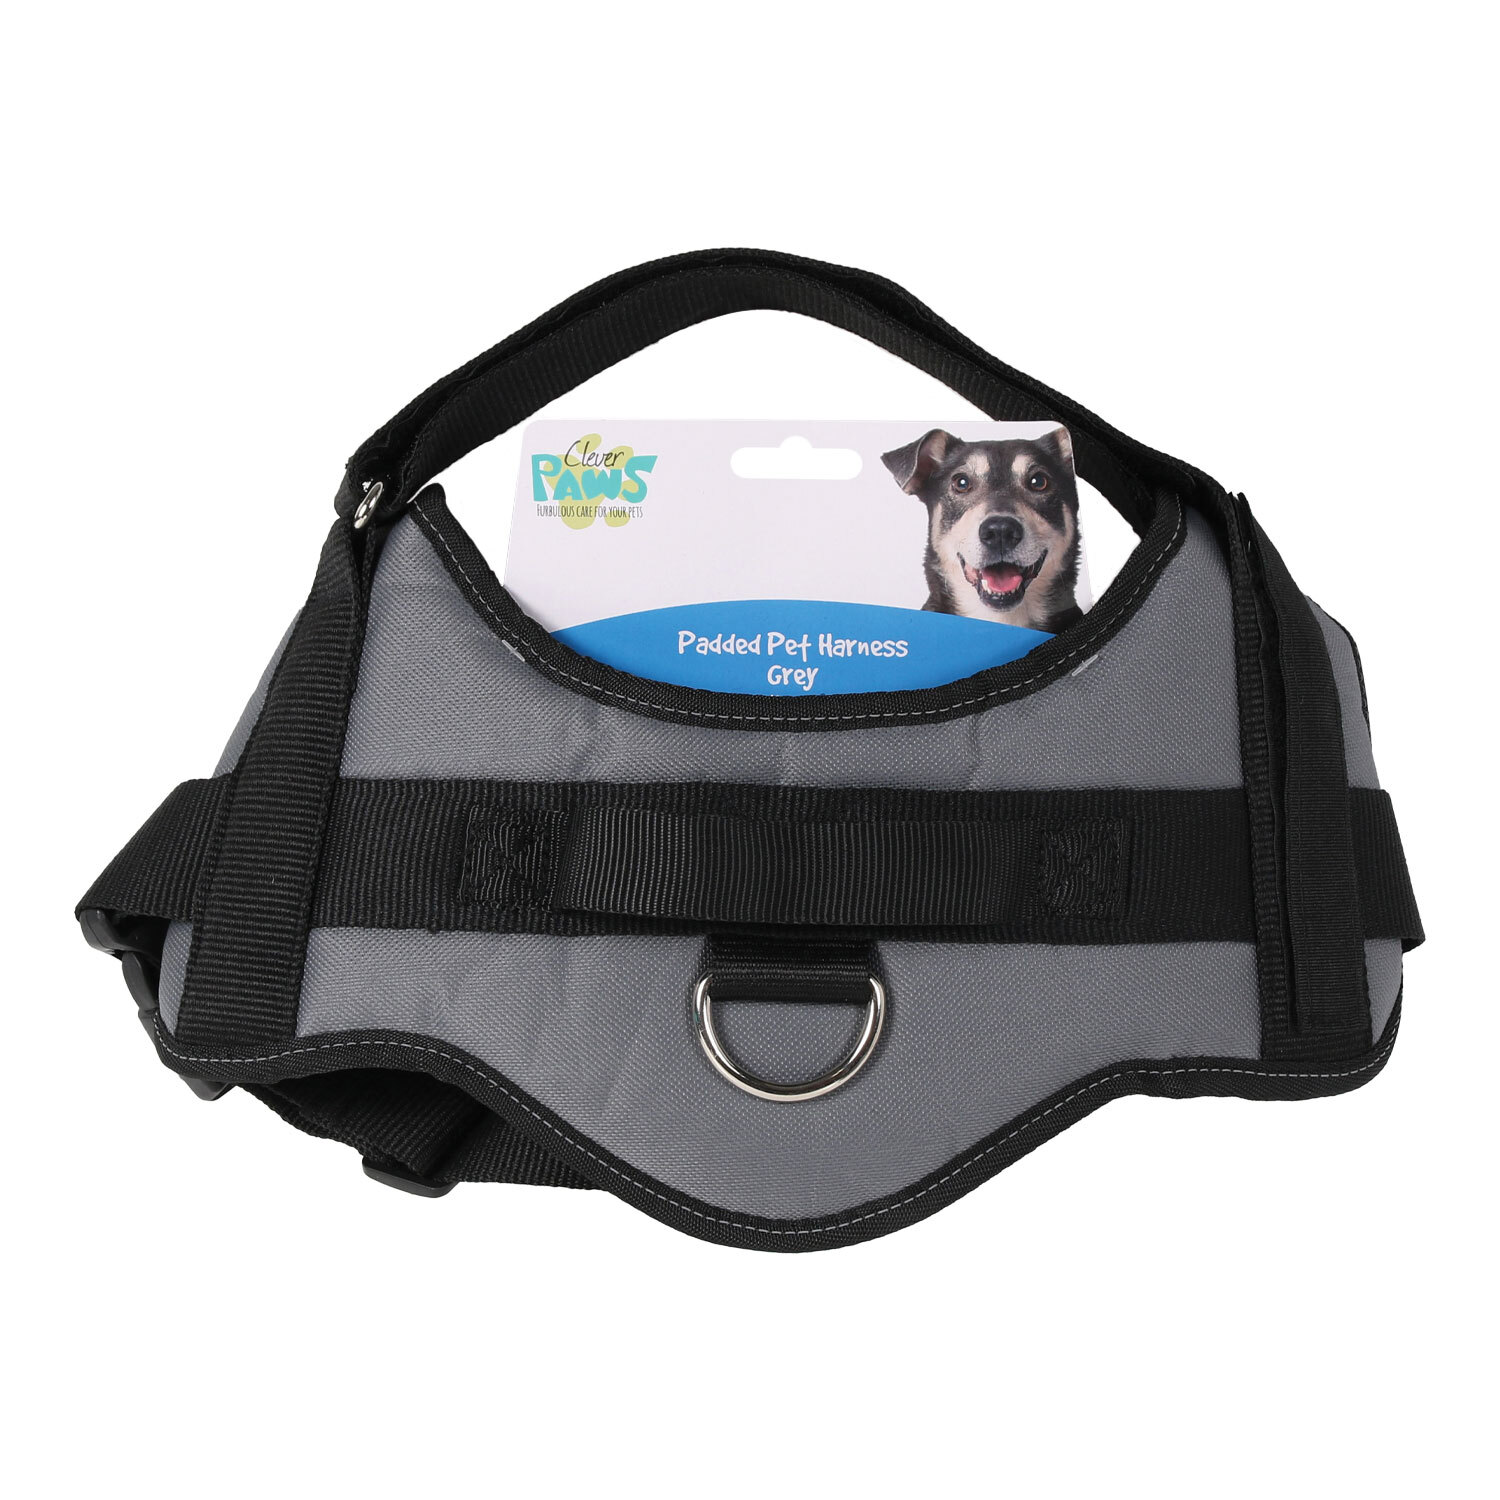 Clever Paws Medium Padded Grey Dog Harness Image 1